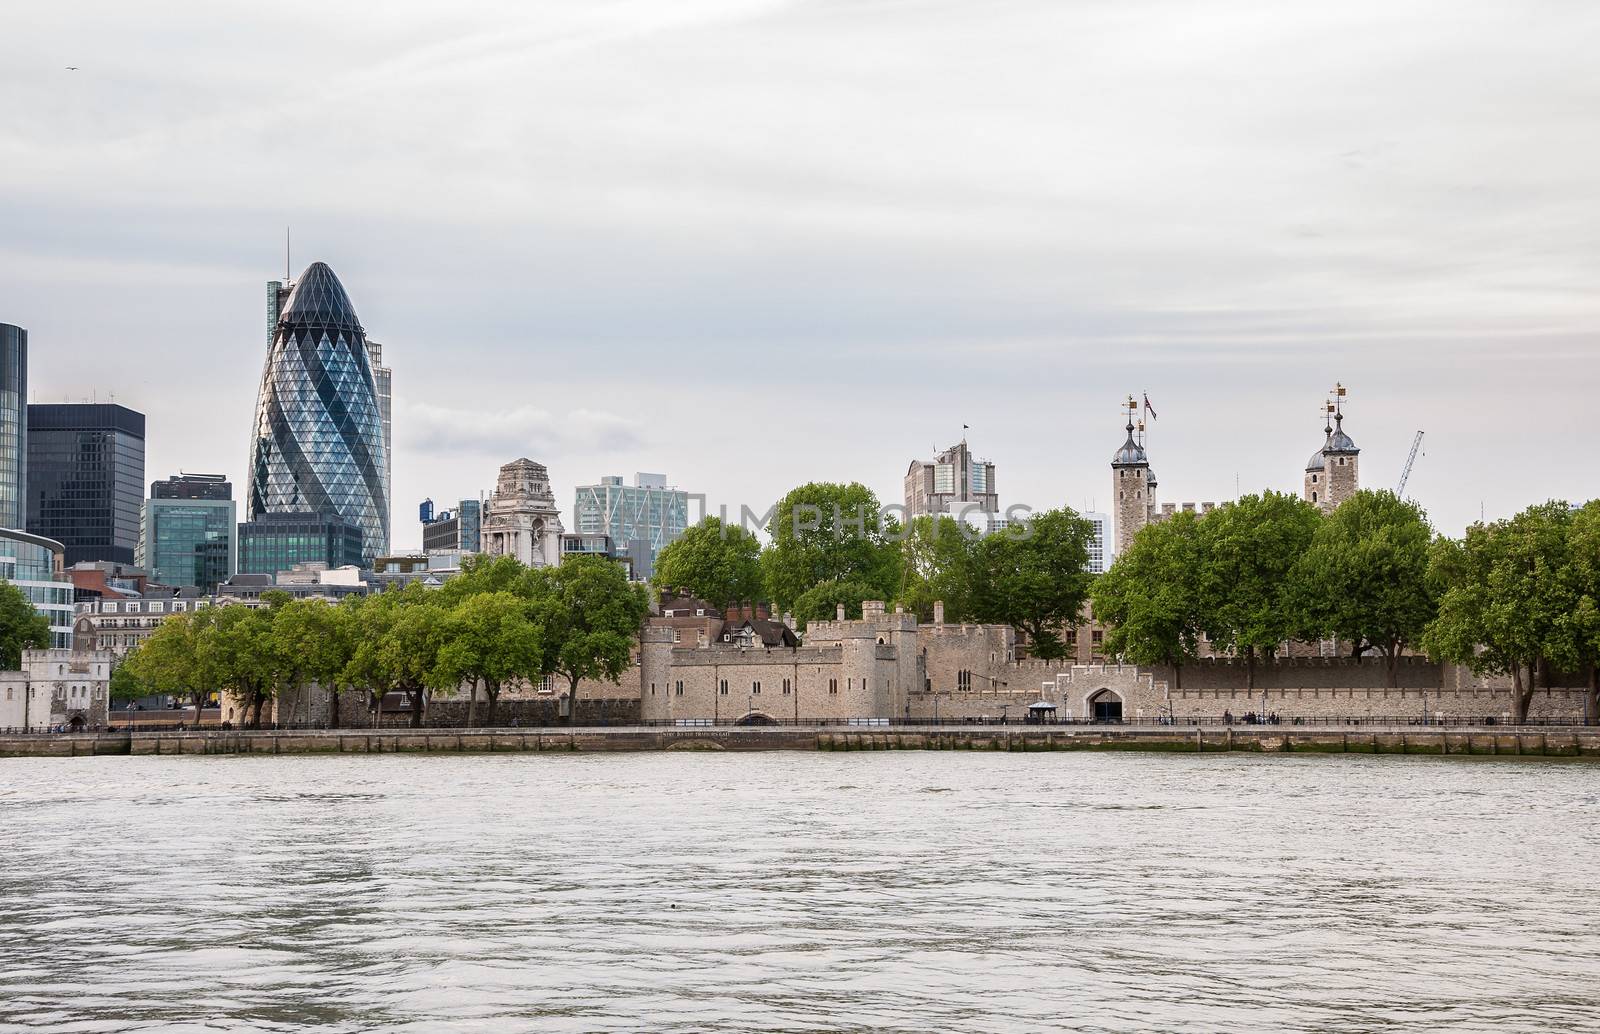 London skyline with Tower of London and Gherkin buildings on a cloudy day